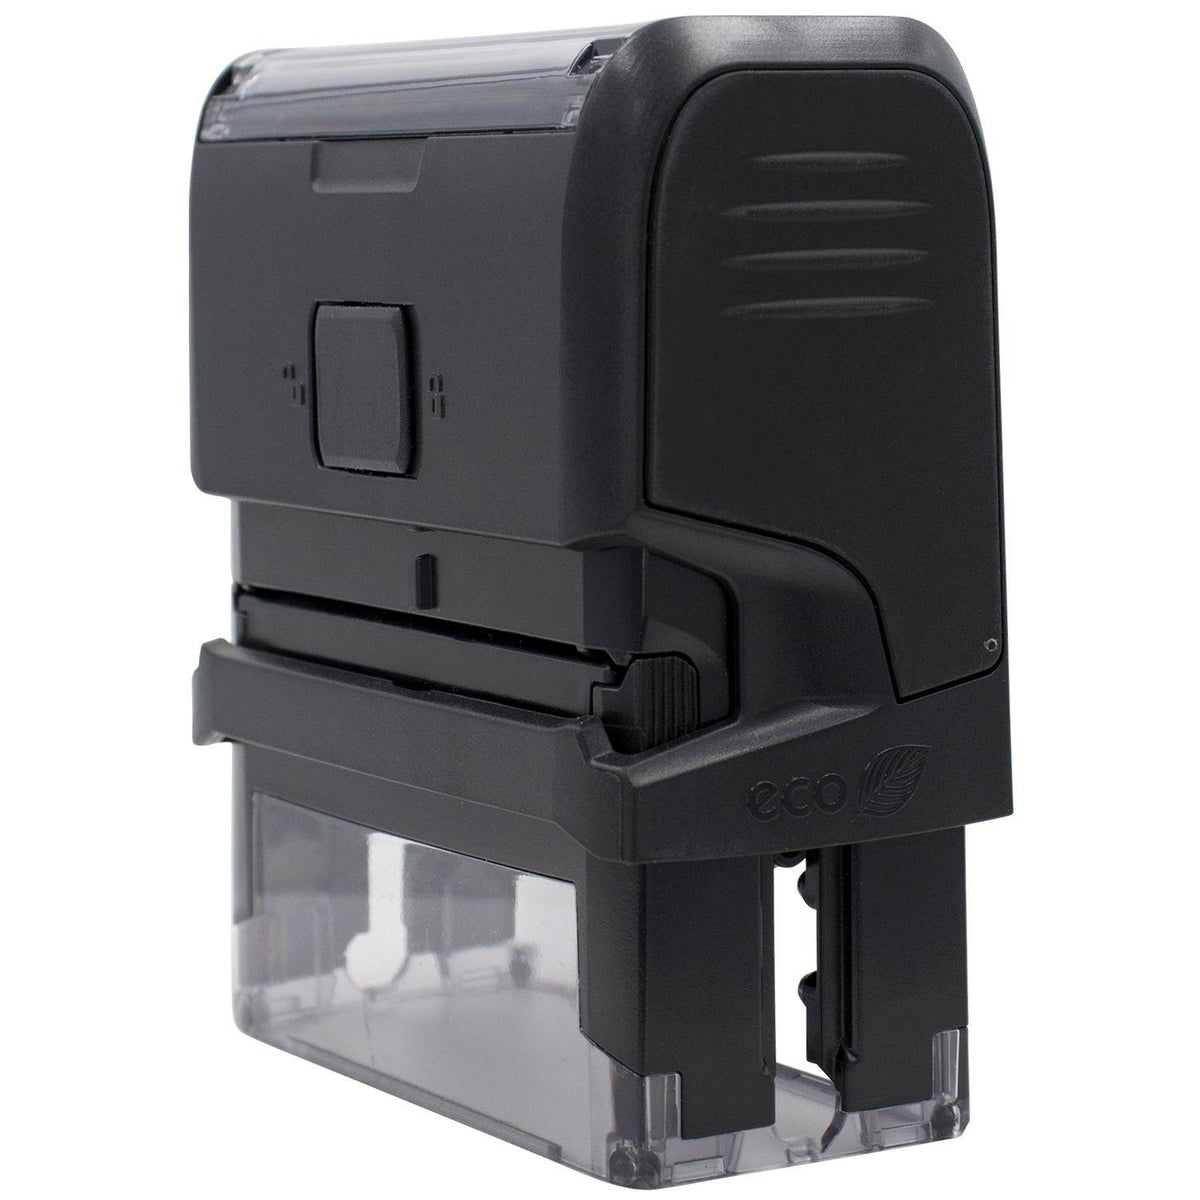 Side View of Large Self Inking Closing Statement Stamp at an Angle